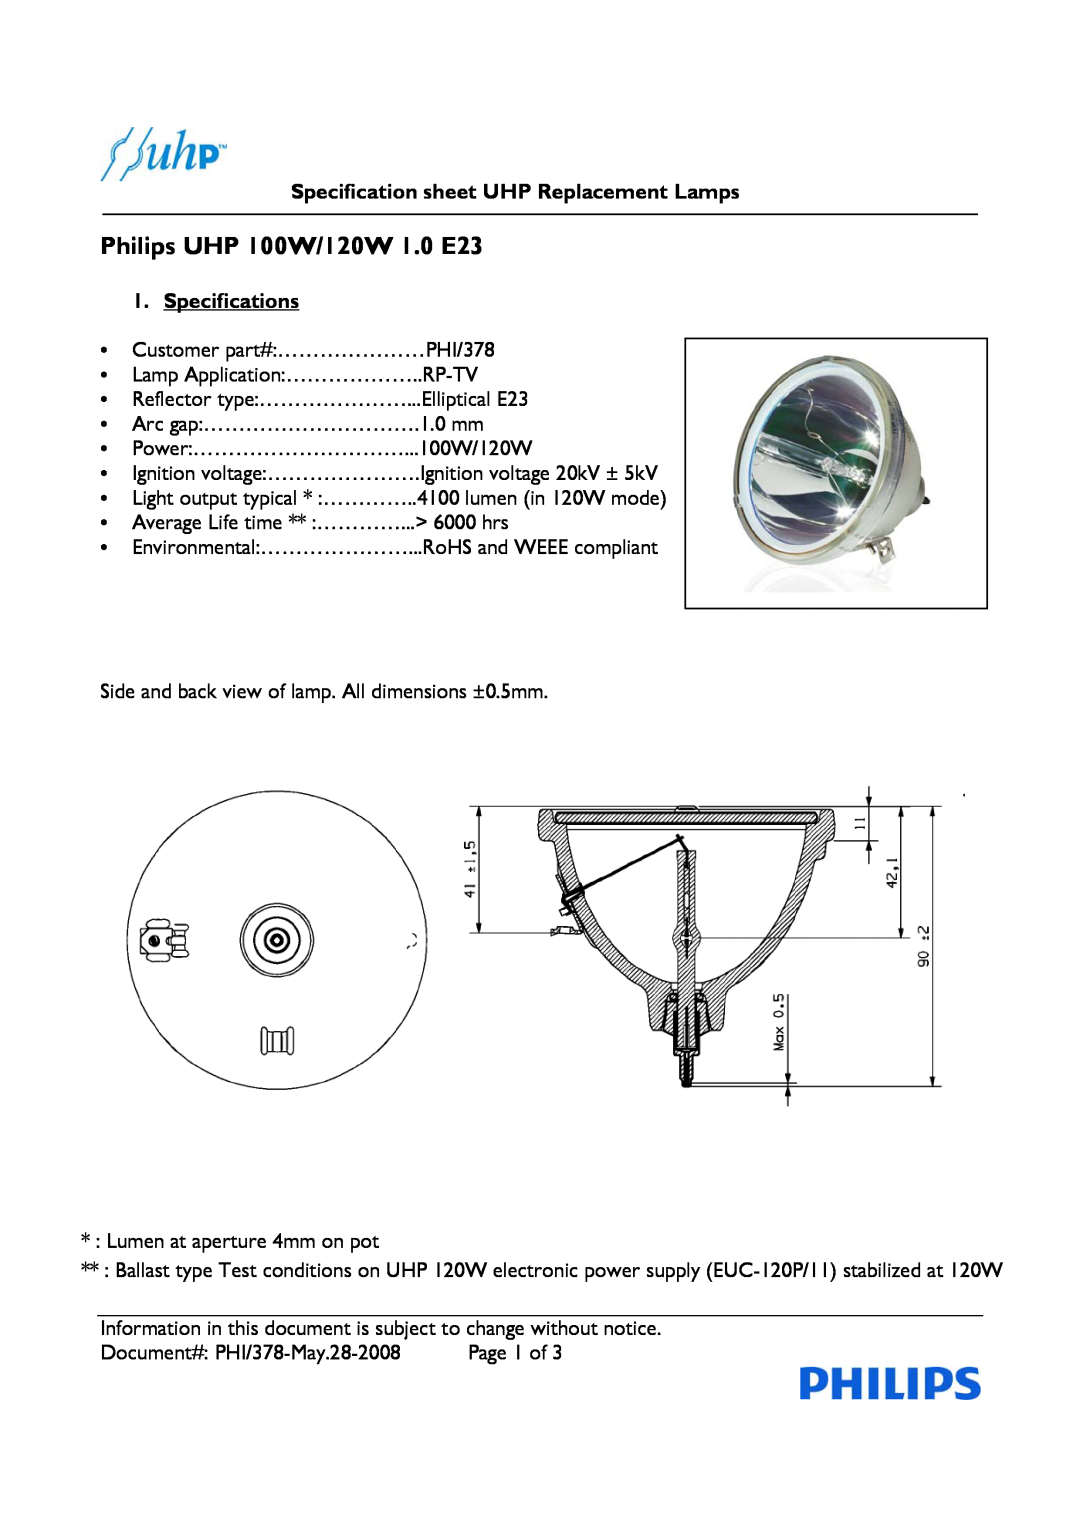 Philips PHI/378 specifications Specification sheet UHP Replacement Lamps, Specifications, Philips UHP 100W/120W 1.0 E23 